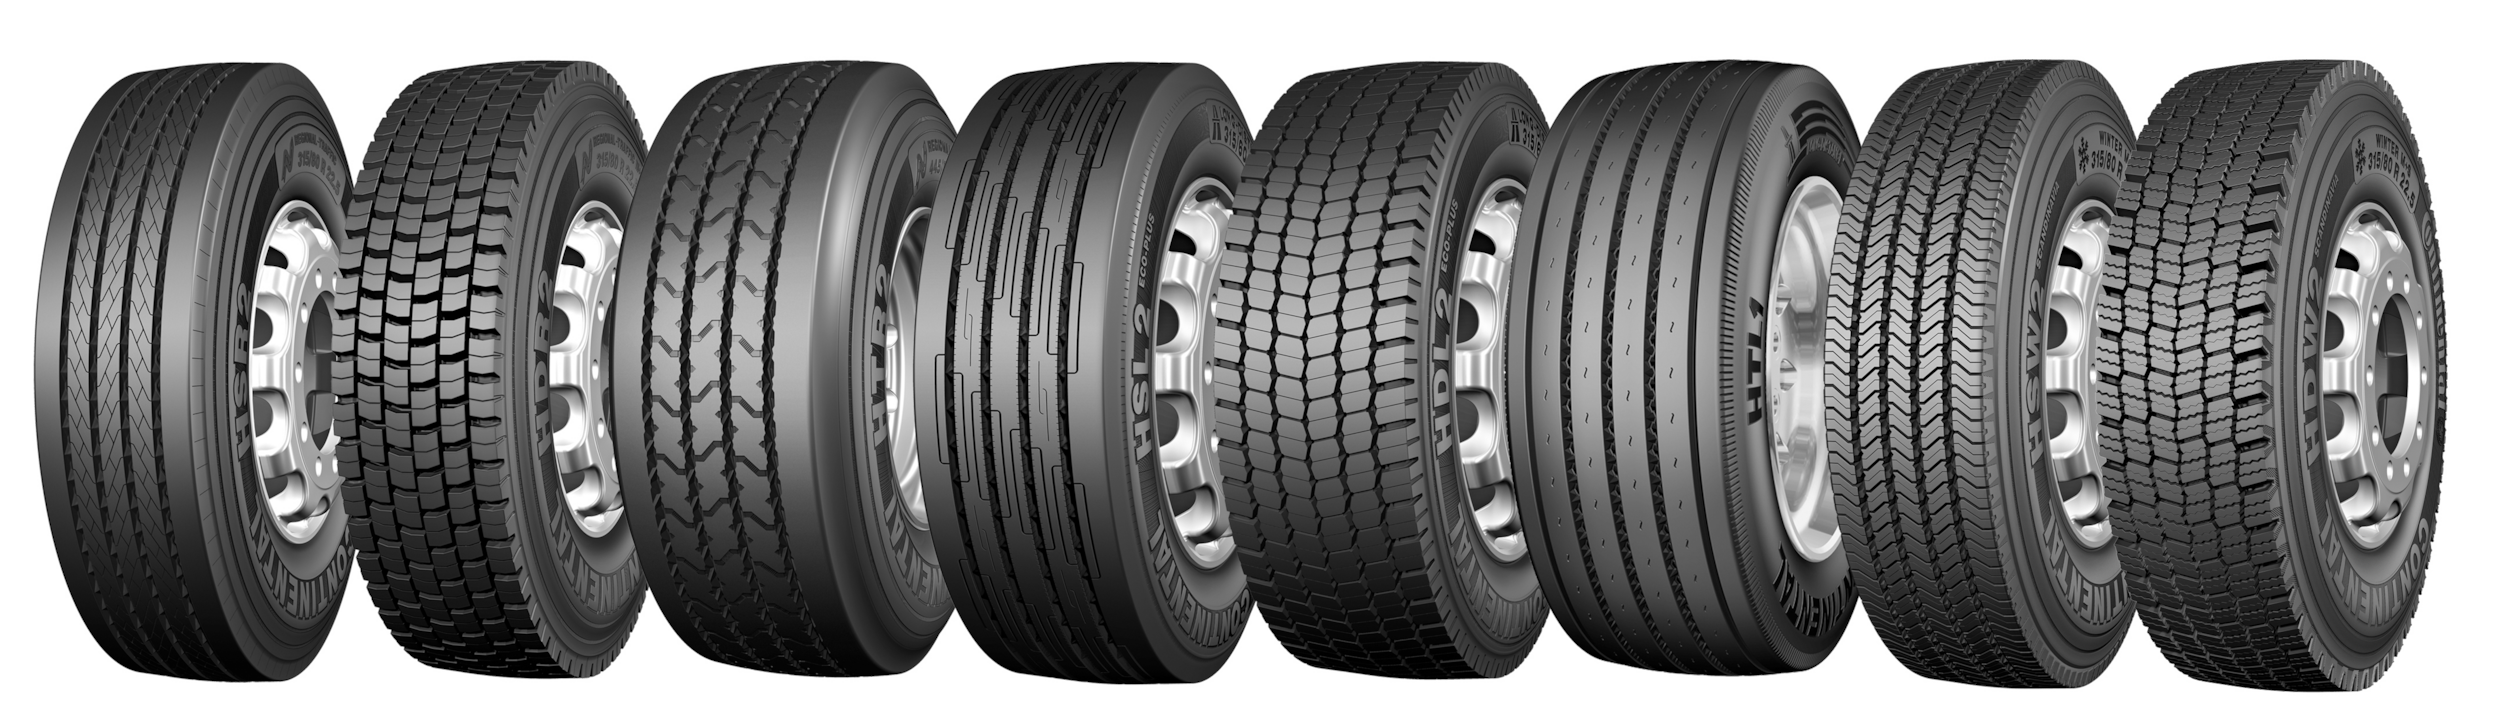 Tire Shop Near Me | Tires for Sale | Toronto Serving Mississauga